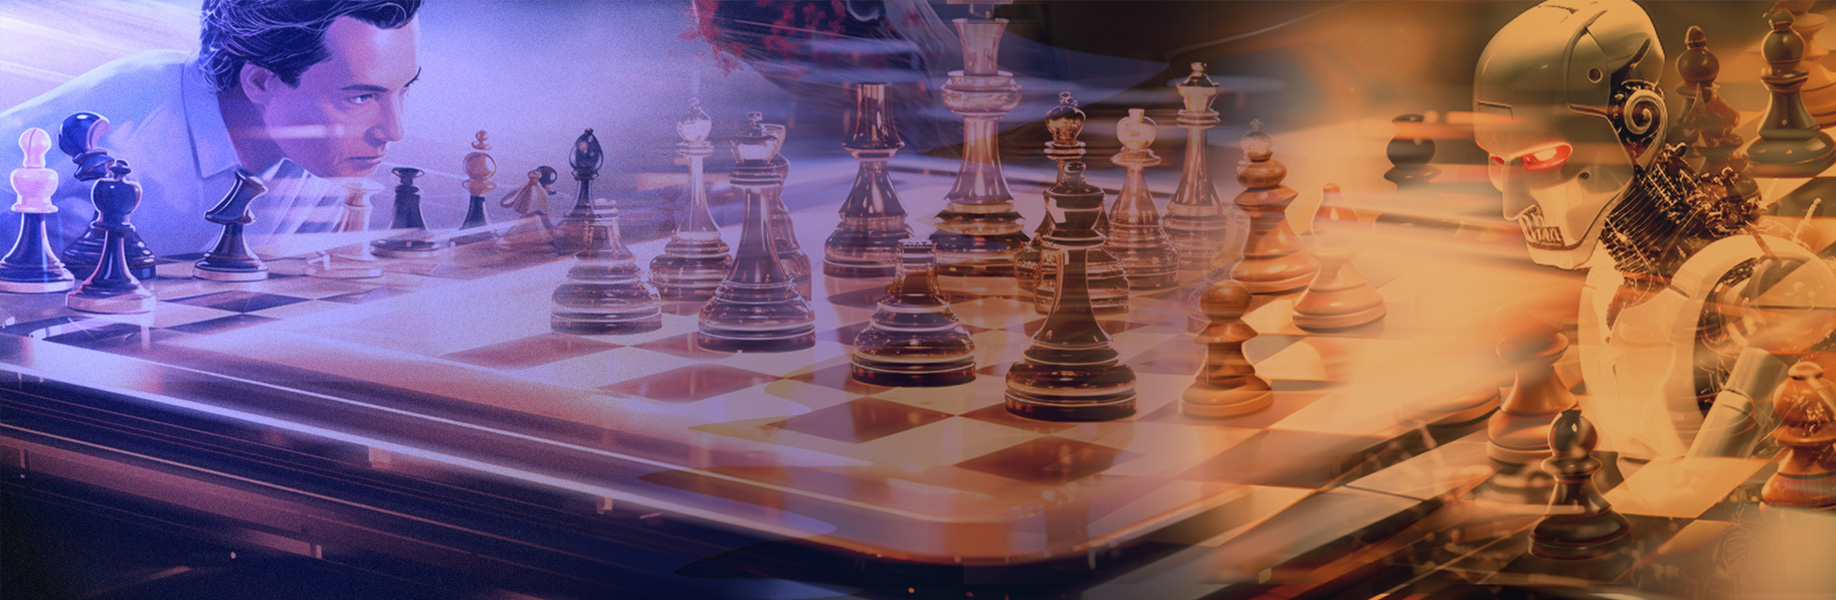 Creative' AlphaZero leads way for chess computers and, maybe, science, Chess